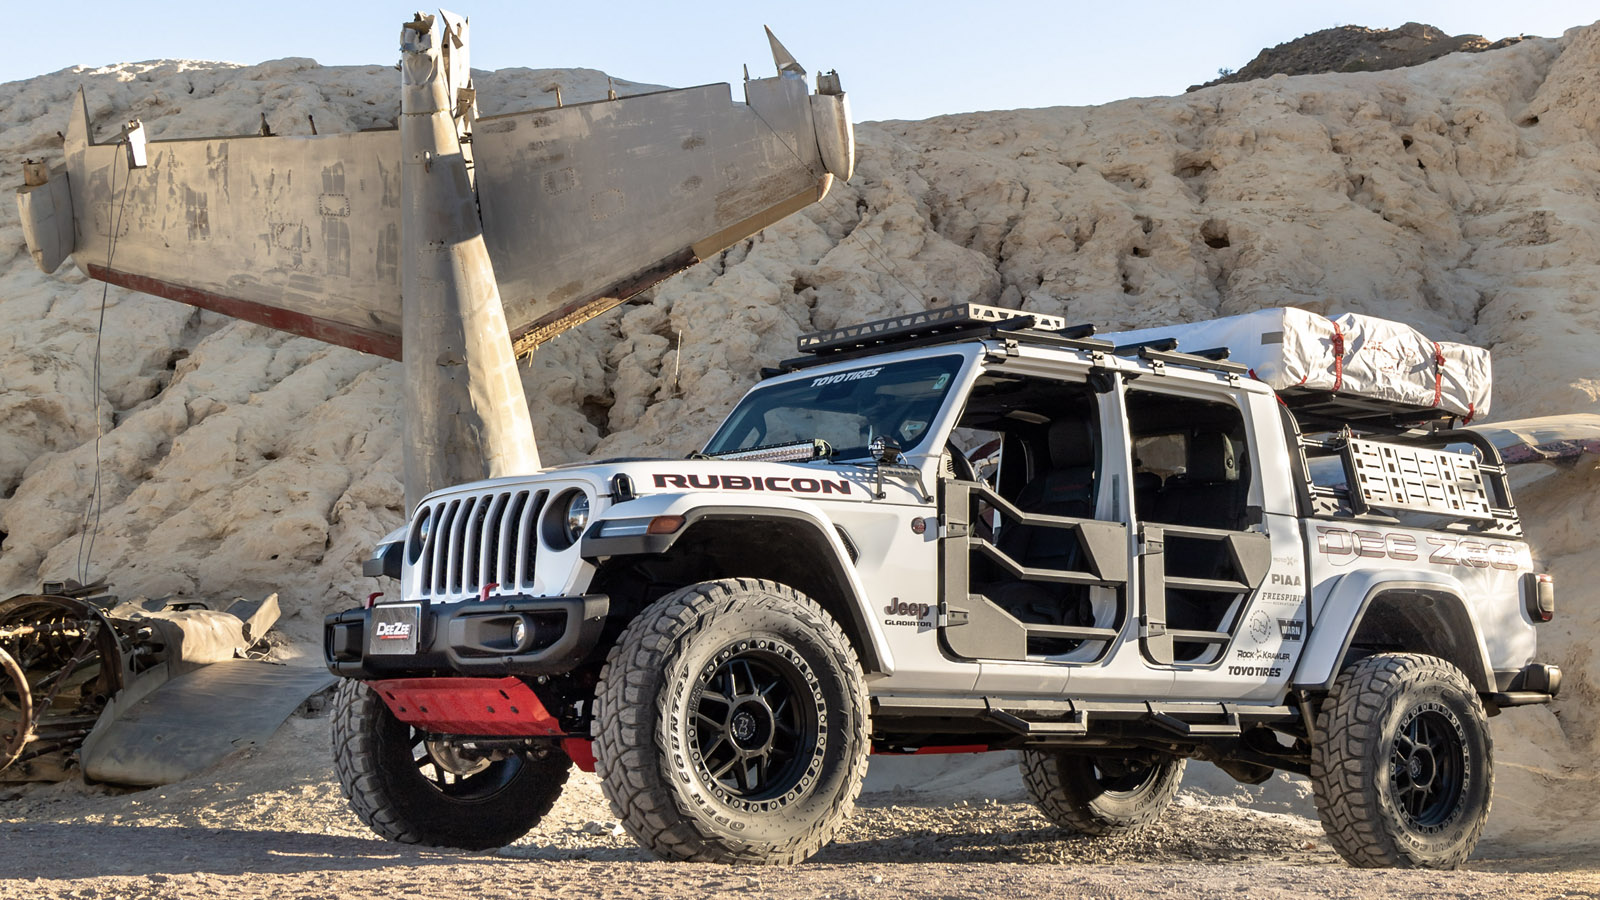 Dee Zee’s Jeep & Overland Product Overview is On Demand – Watch Now | THE SHOP